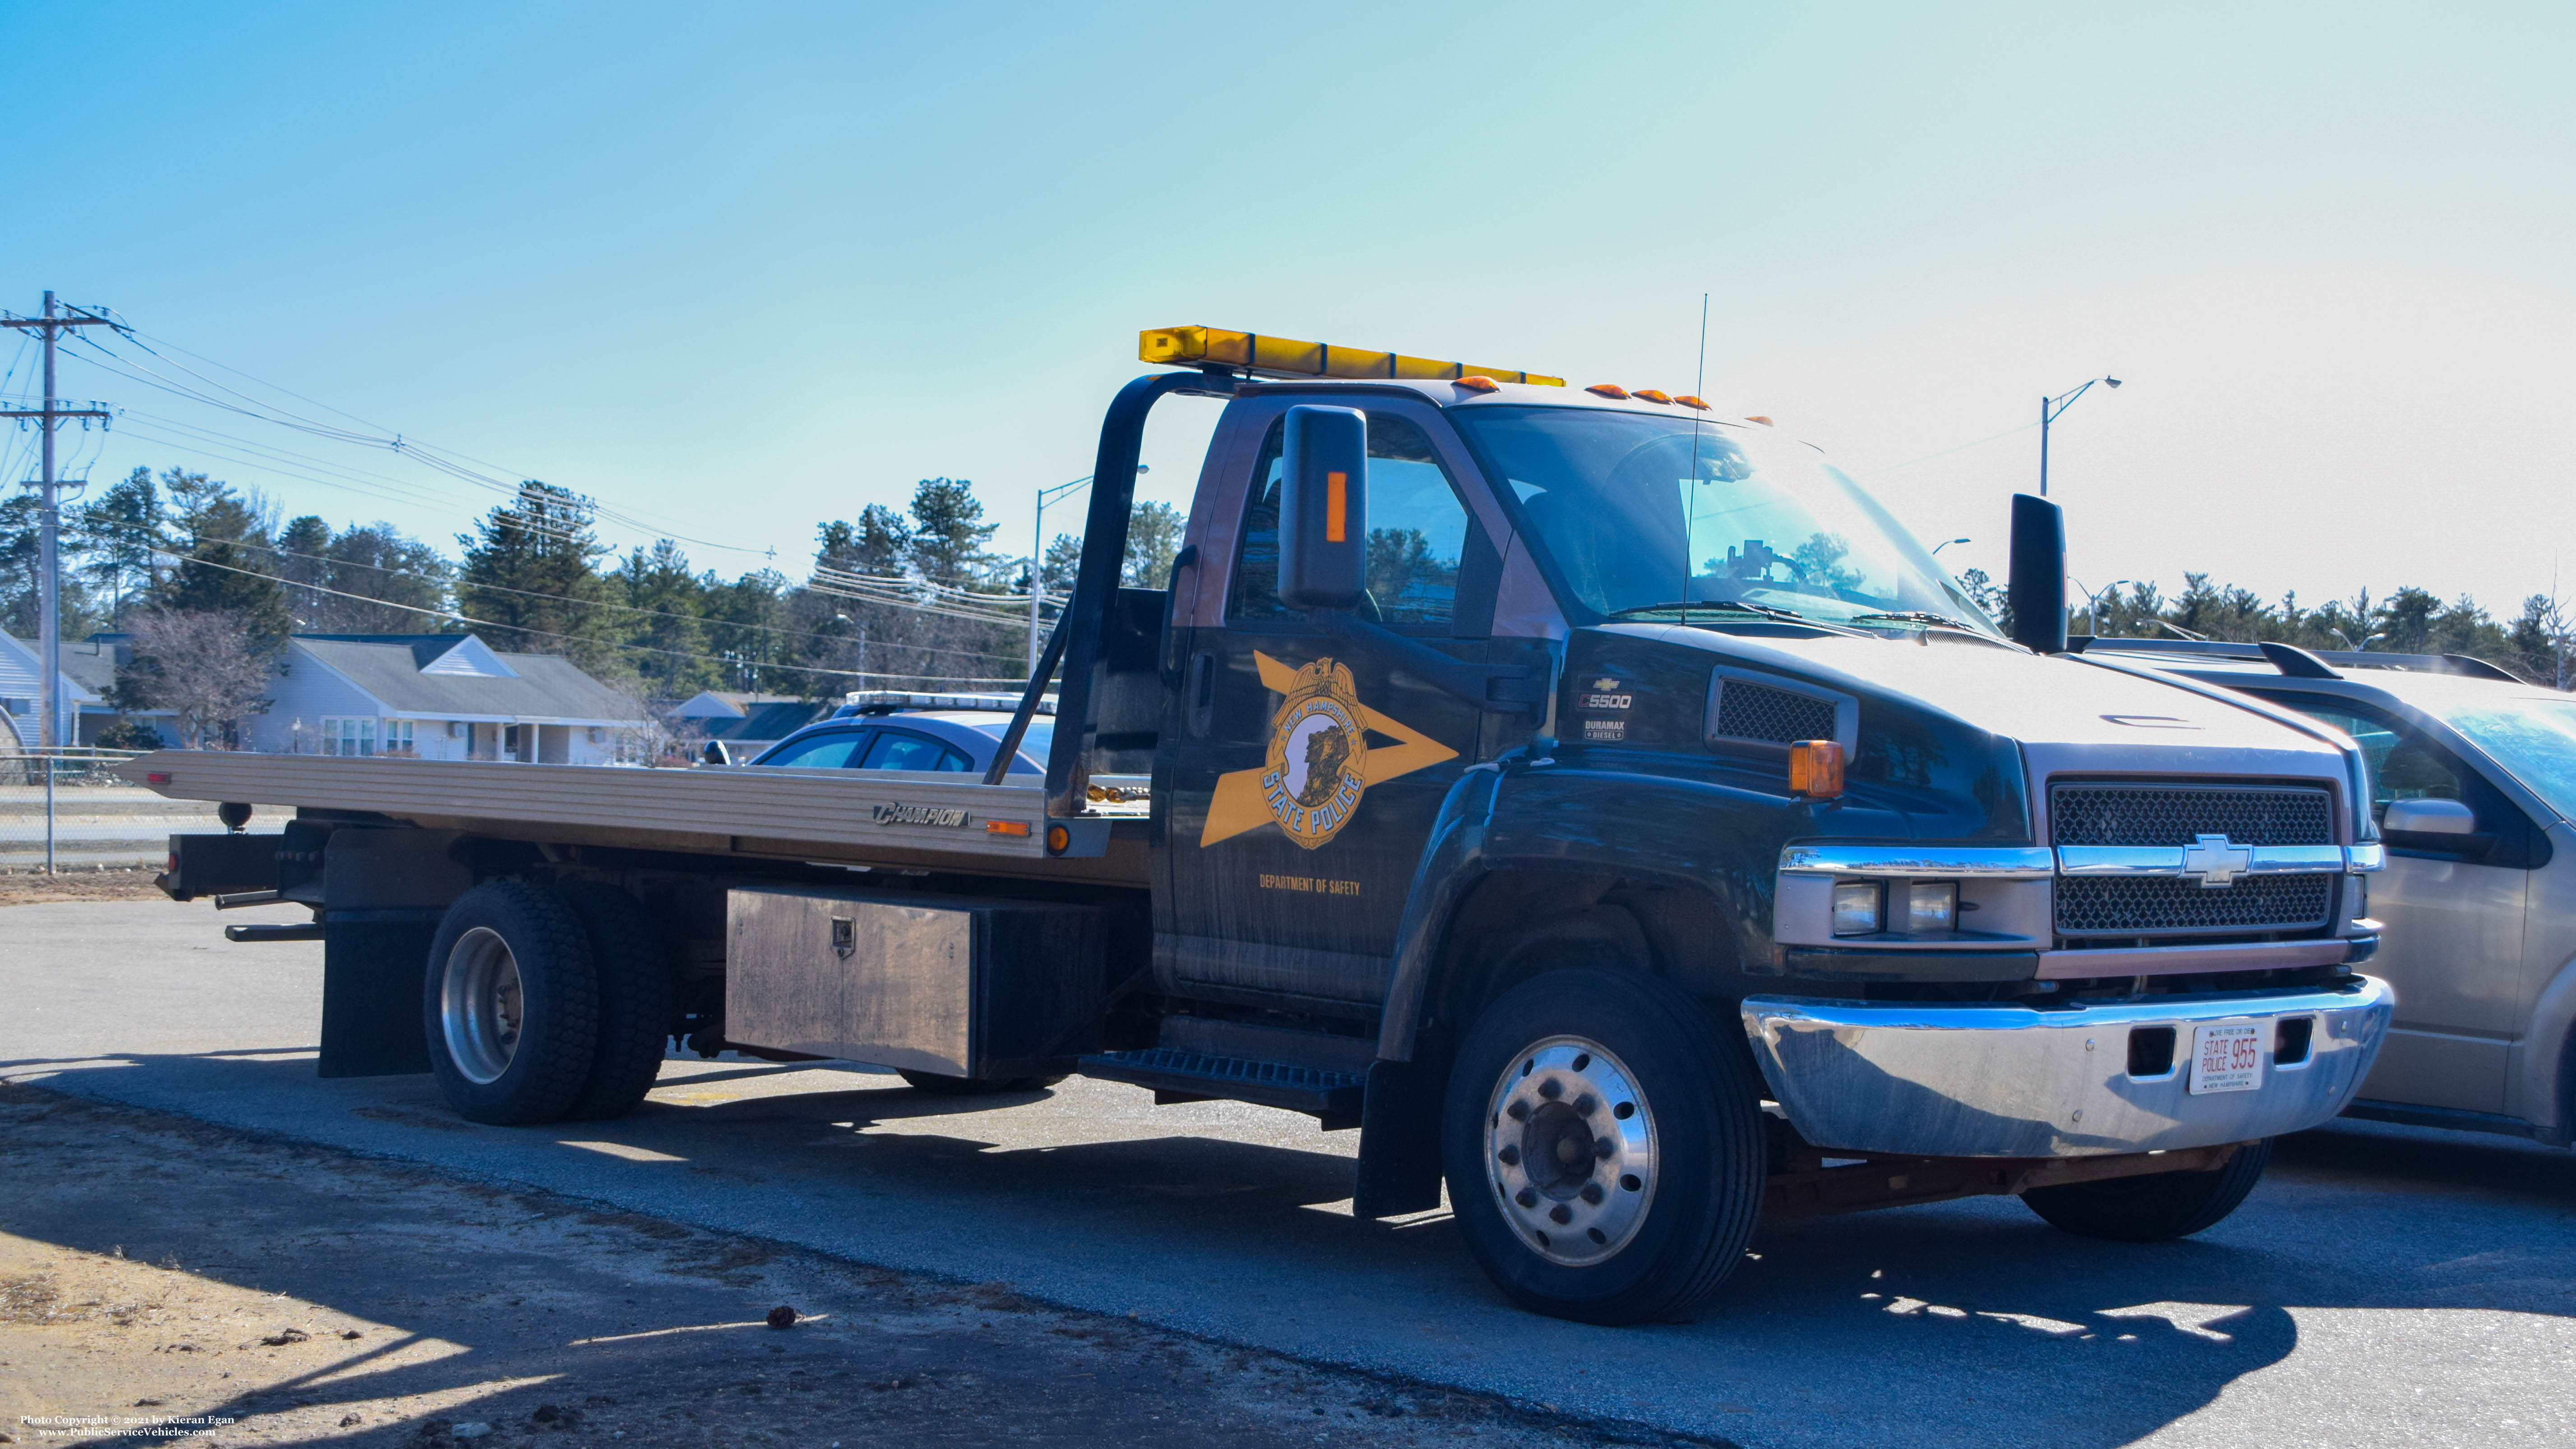 A photo  of New Hampshire State Police
            Truck 955, a 2003-2009 Chevrolet C5500/Champion Rollback             taken by Kieran Egan